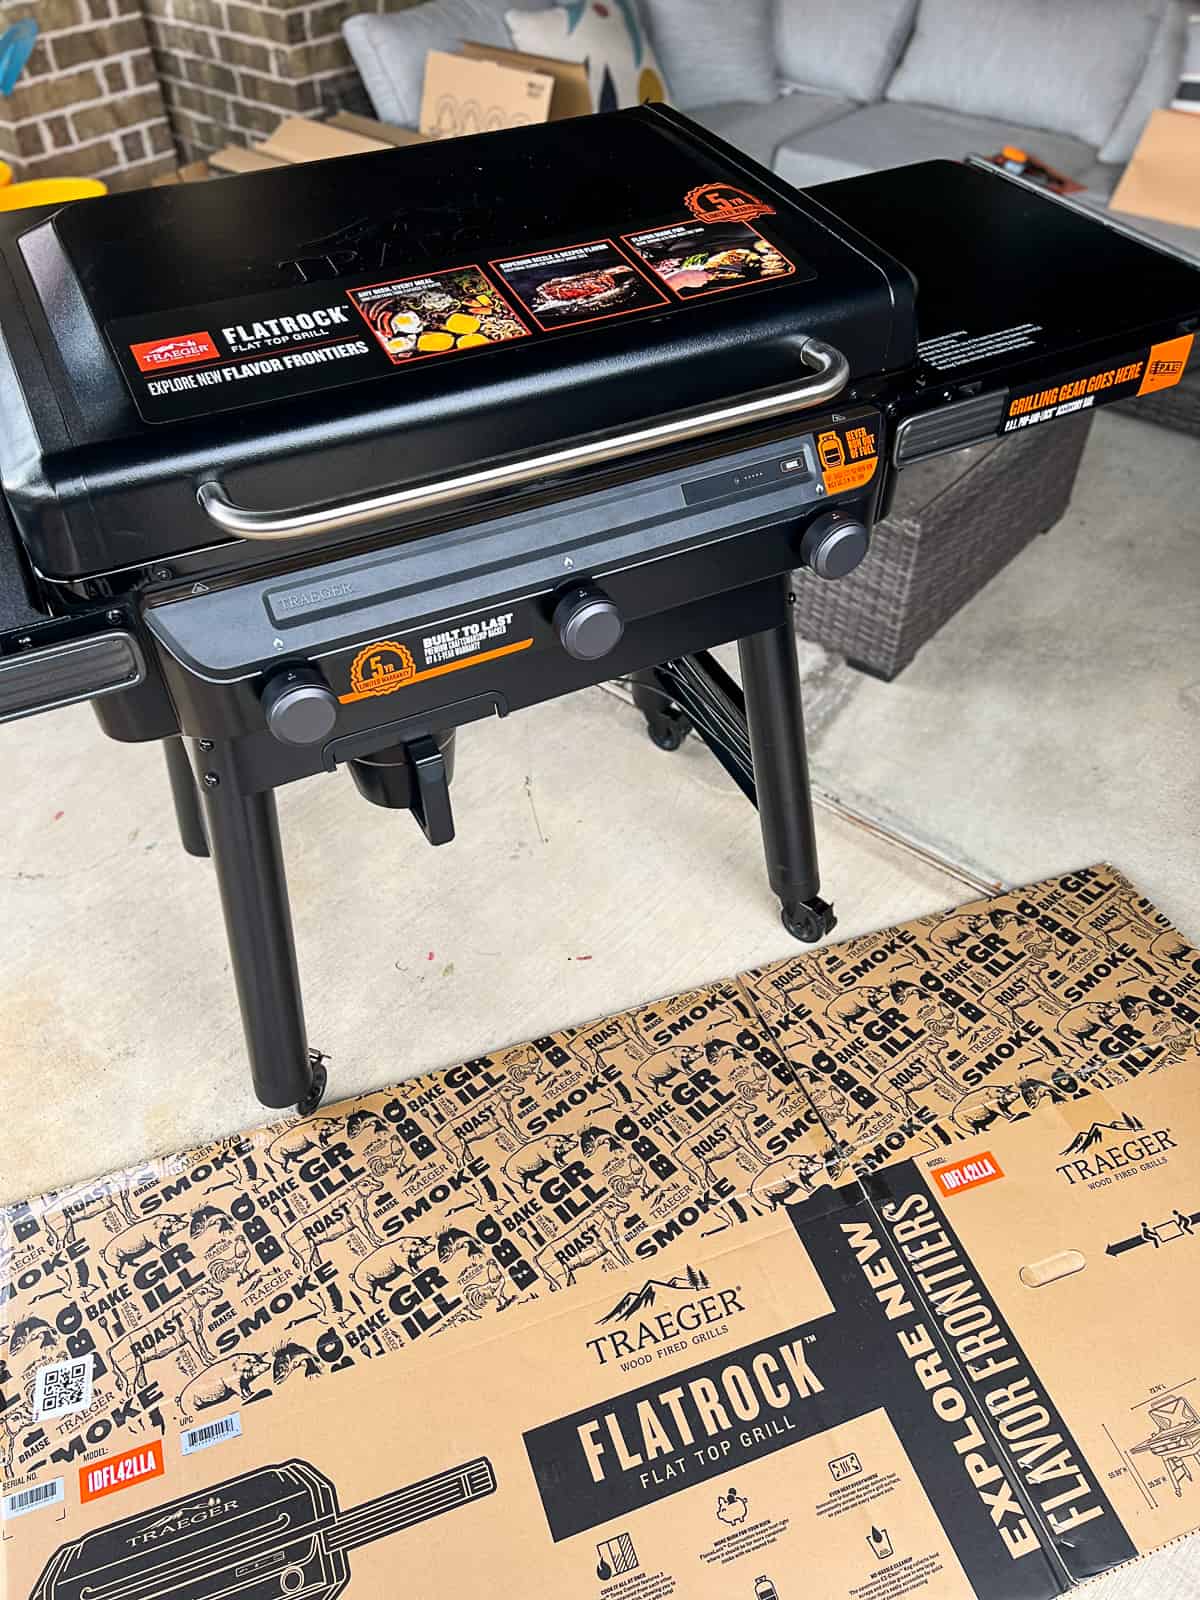 New Flatrock Traeger Griddle with Box